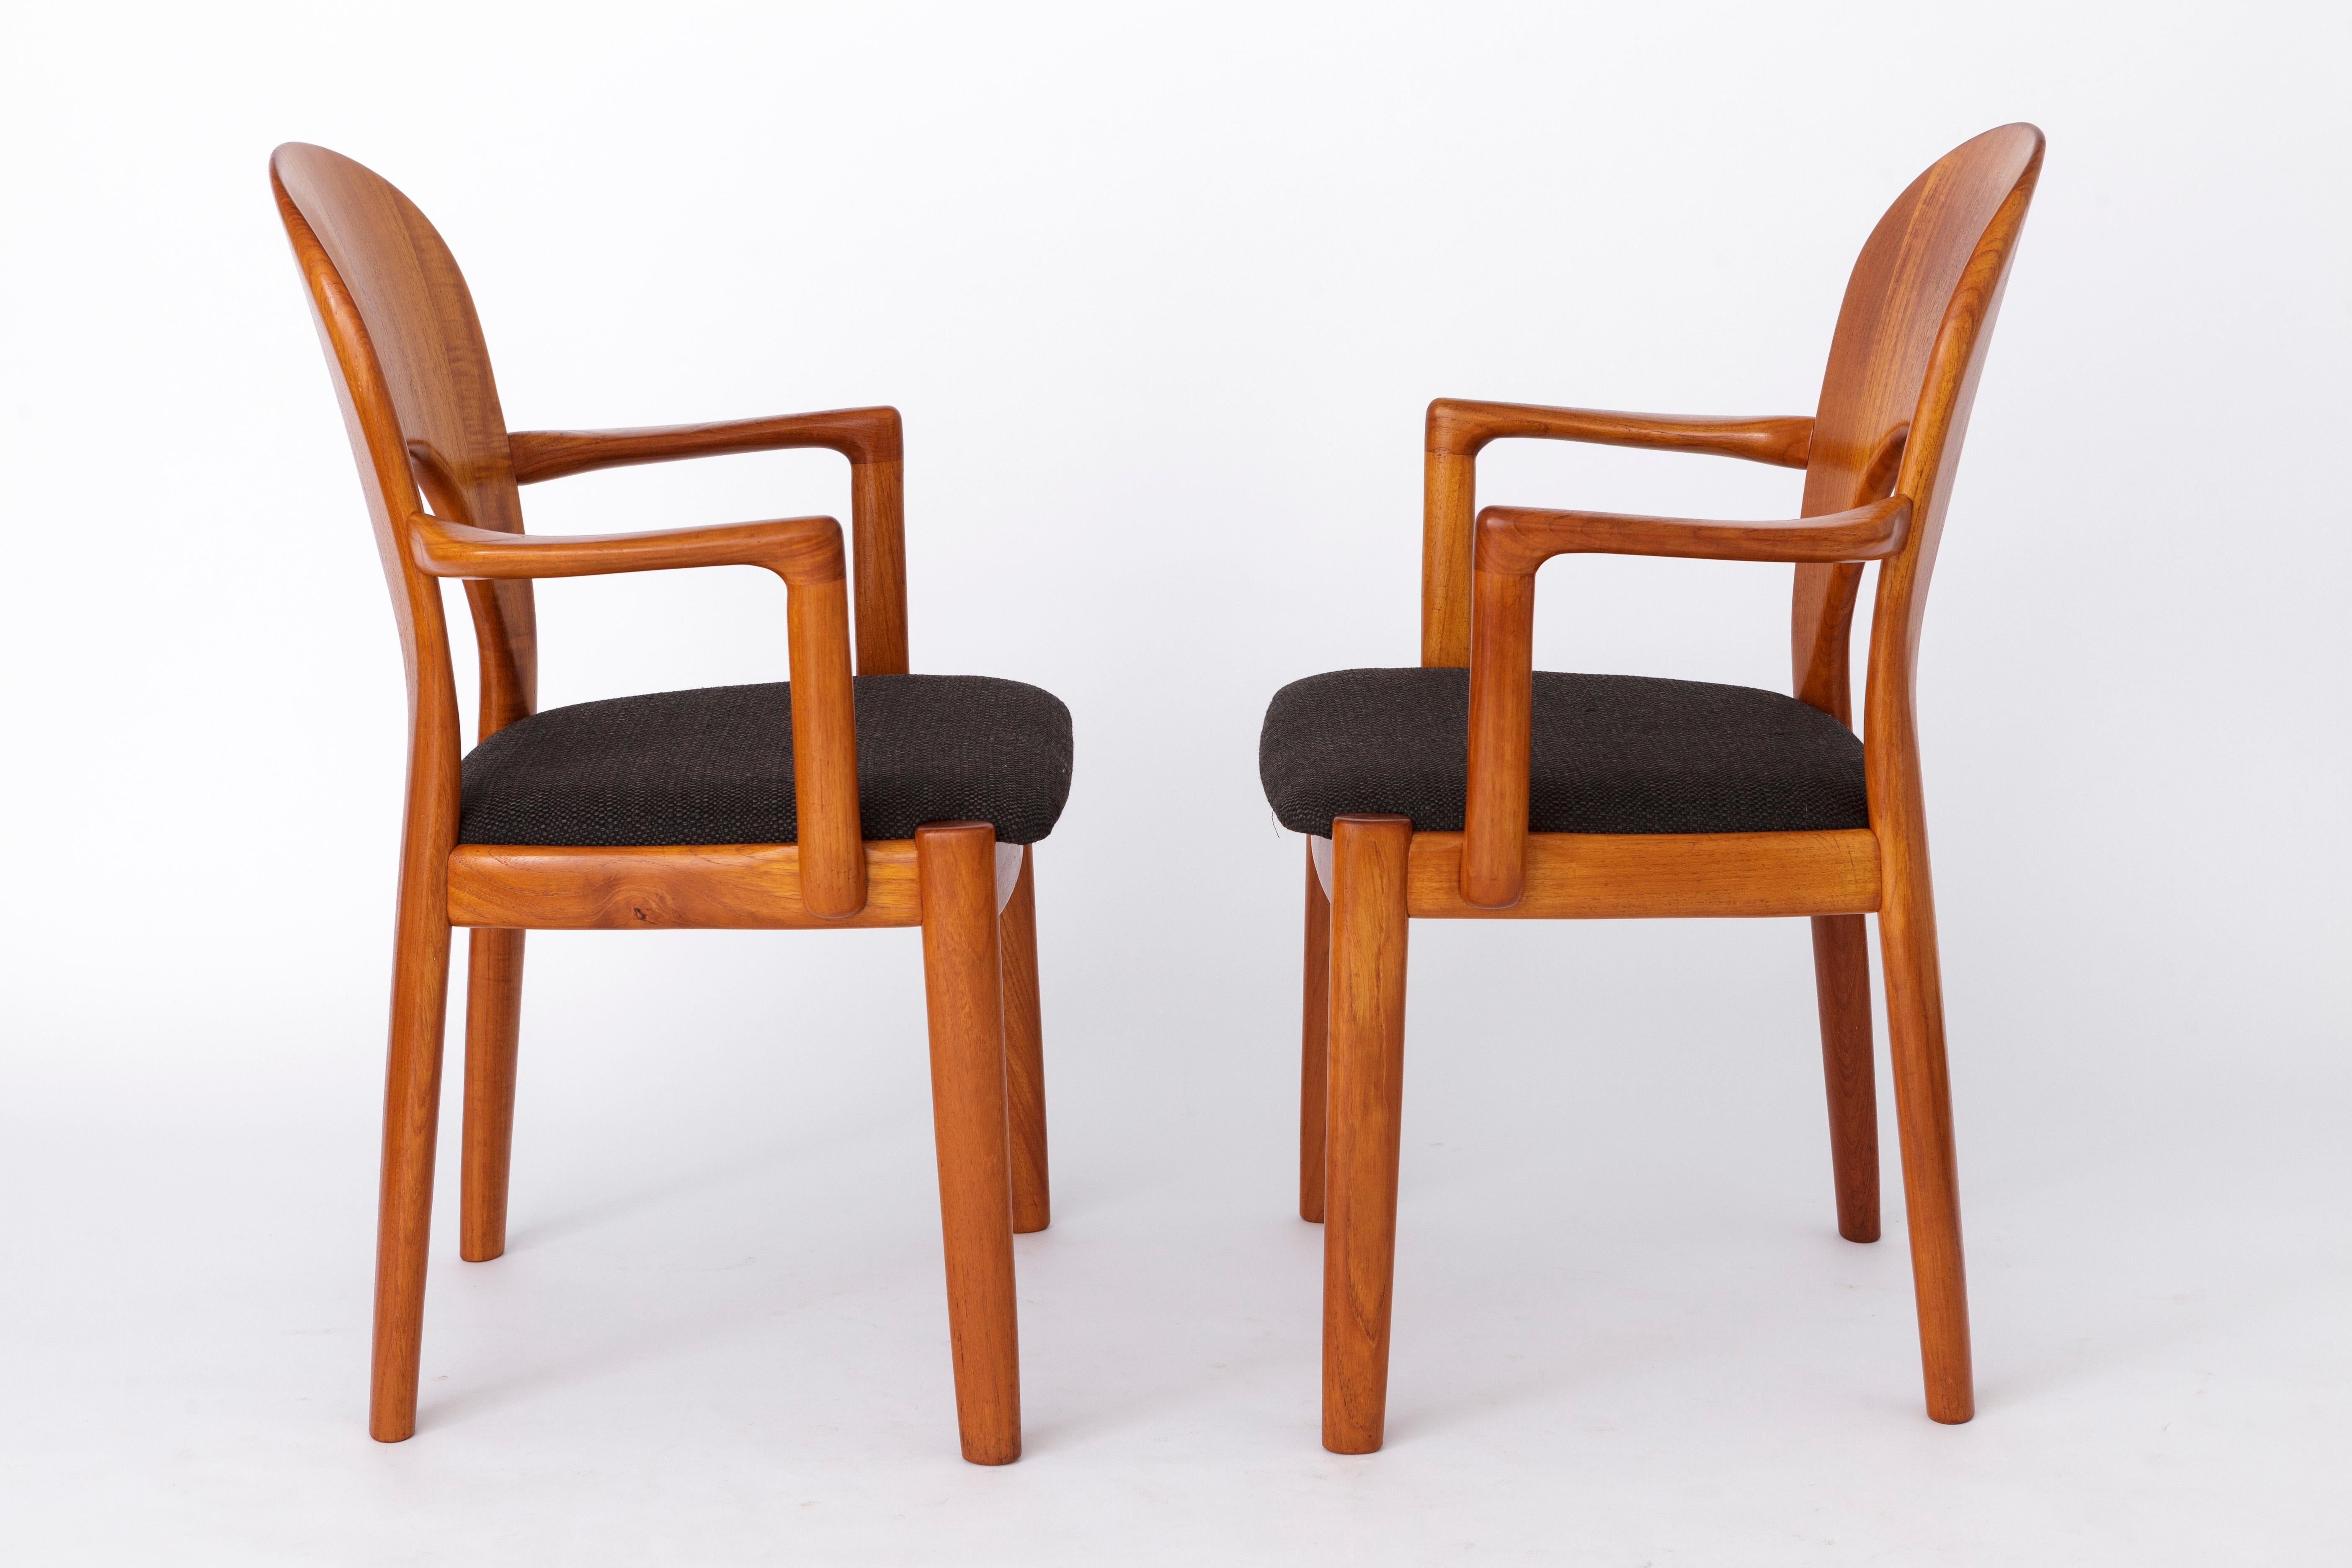 2 Armchairs by Niels Koefoed, Denmark. 
Production period: approx. 1960s-1970s
Displayed price is for a pair. Totally 4 chairs (2 pairs) available. 

Sturdy teak wood frame. Refurbished and oiled. 
Reupholstered seat covers with black textile.